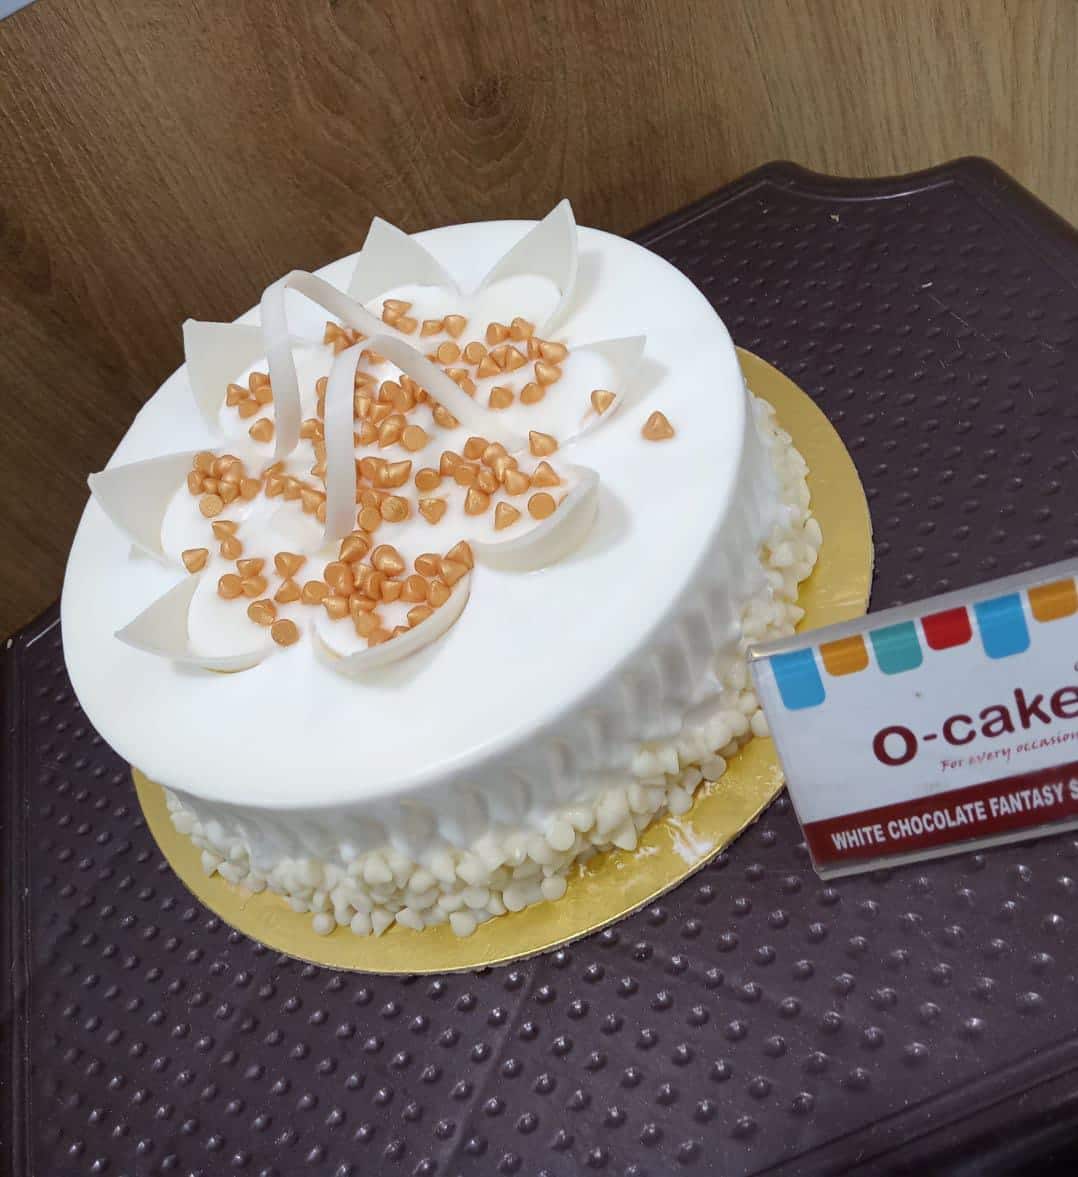 O Cakes franchise business opportunity